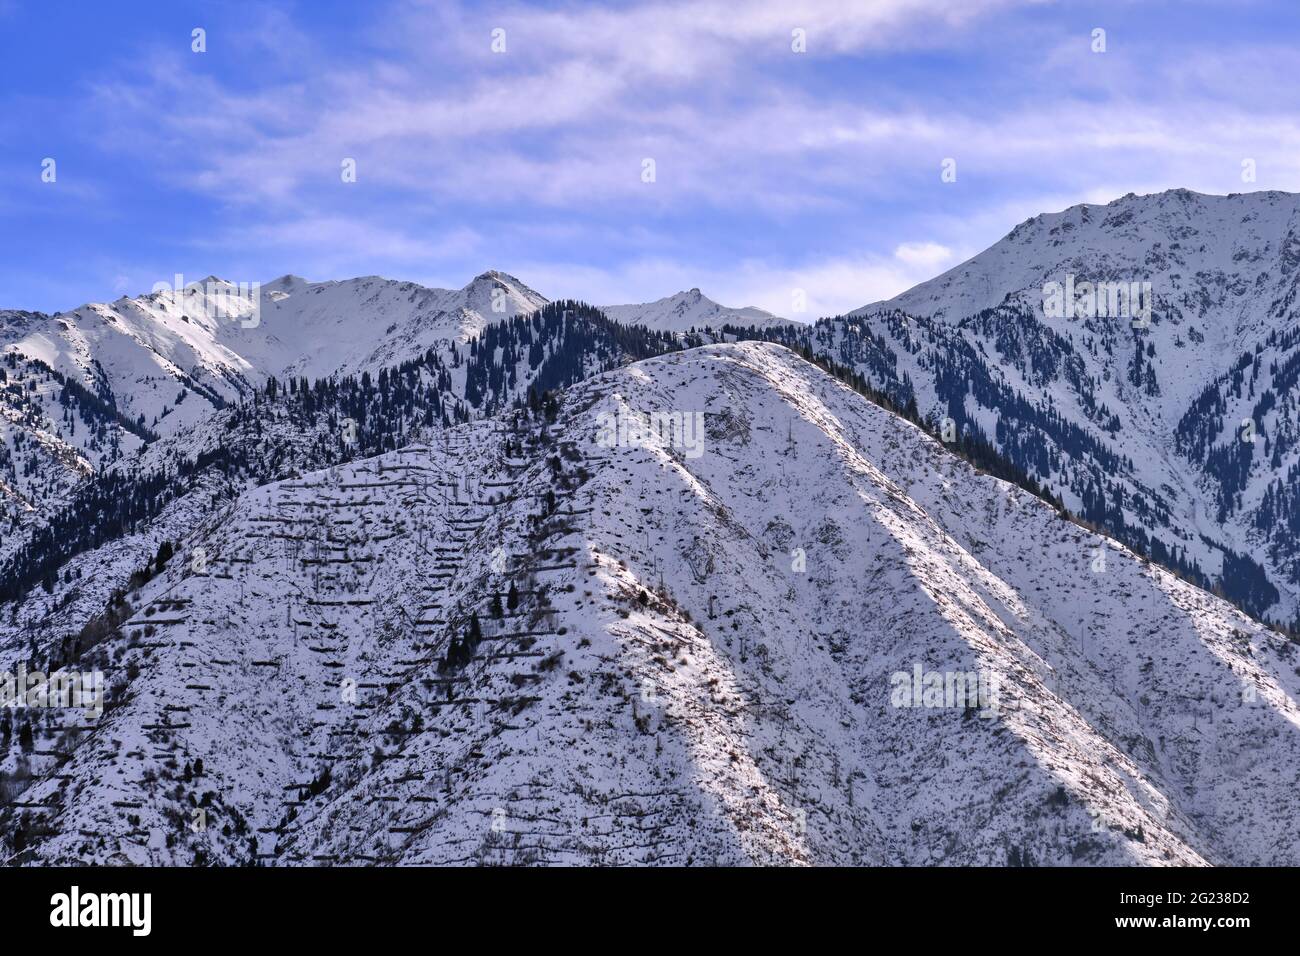 Majestic snowy mountains with fir forest on the background of blue sky with clouds in the winter season Stock Photo